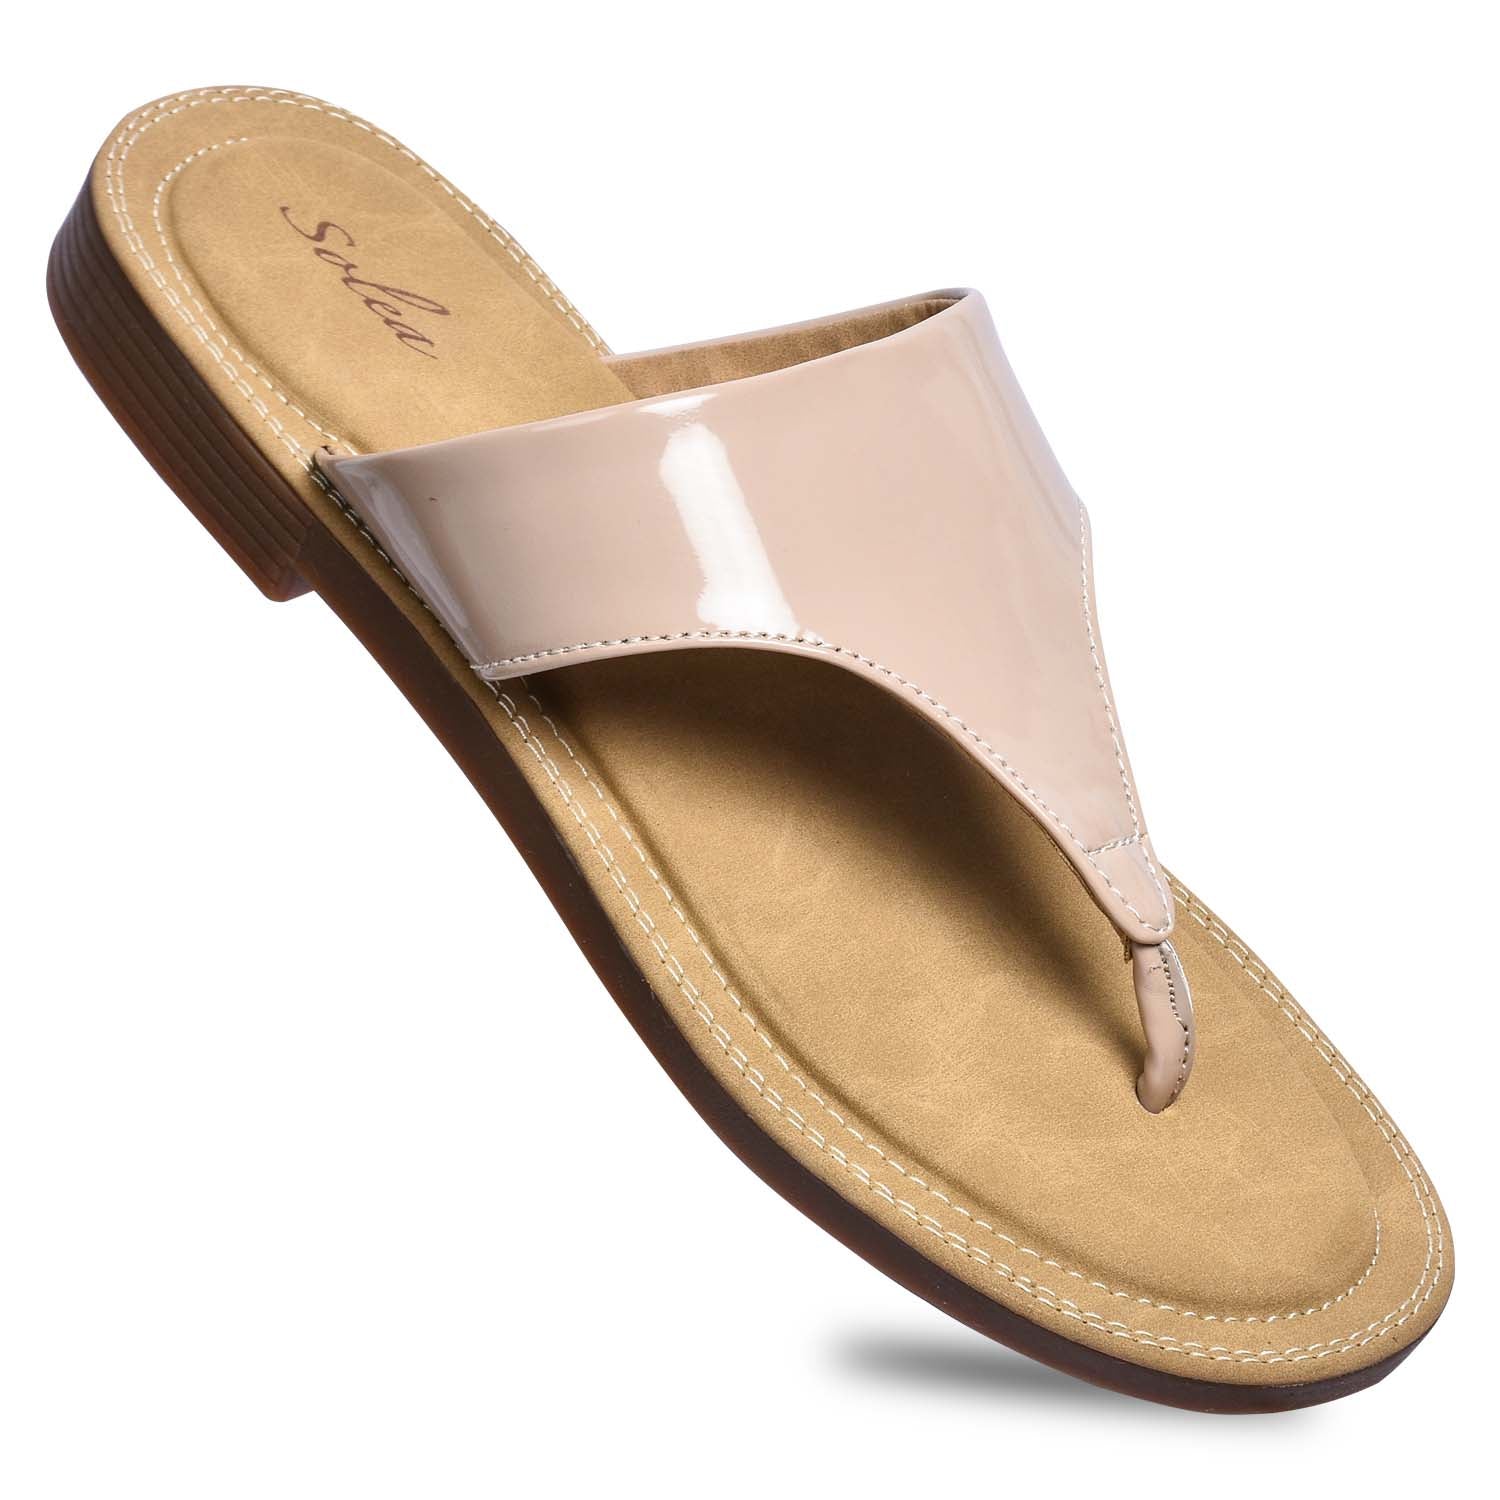 Paragon R1001L Women Sandals | Casual &amp; Formal Sandals | Stylish, Comfortable &amp; Durable | For Daily &amp; Occasion Wear